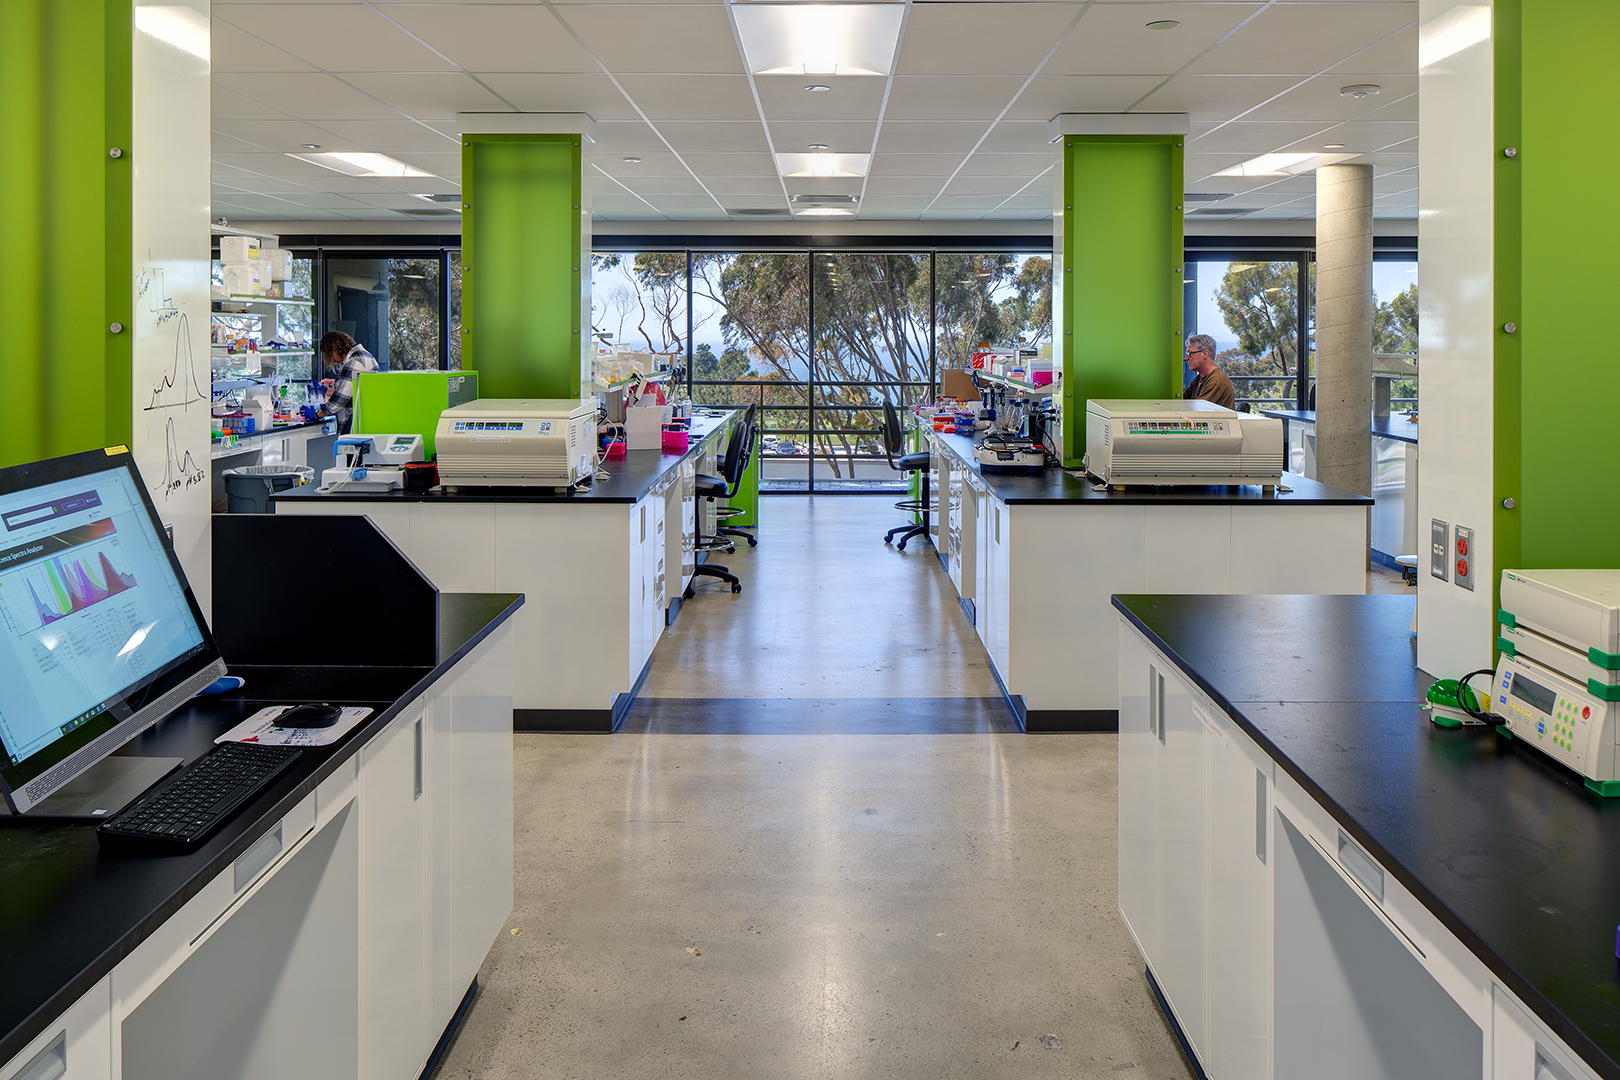 Interior of the Inhibrx company's offices in Torrey Pines Science Park. (Photos courtesy of DZI Construction)